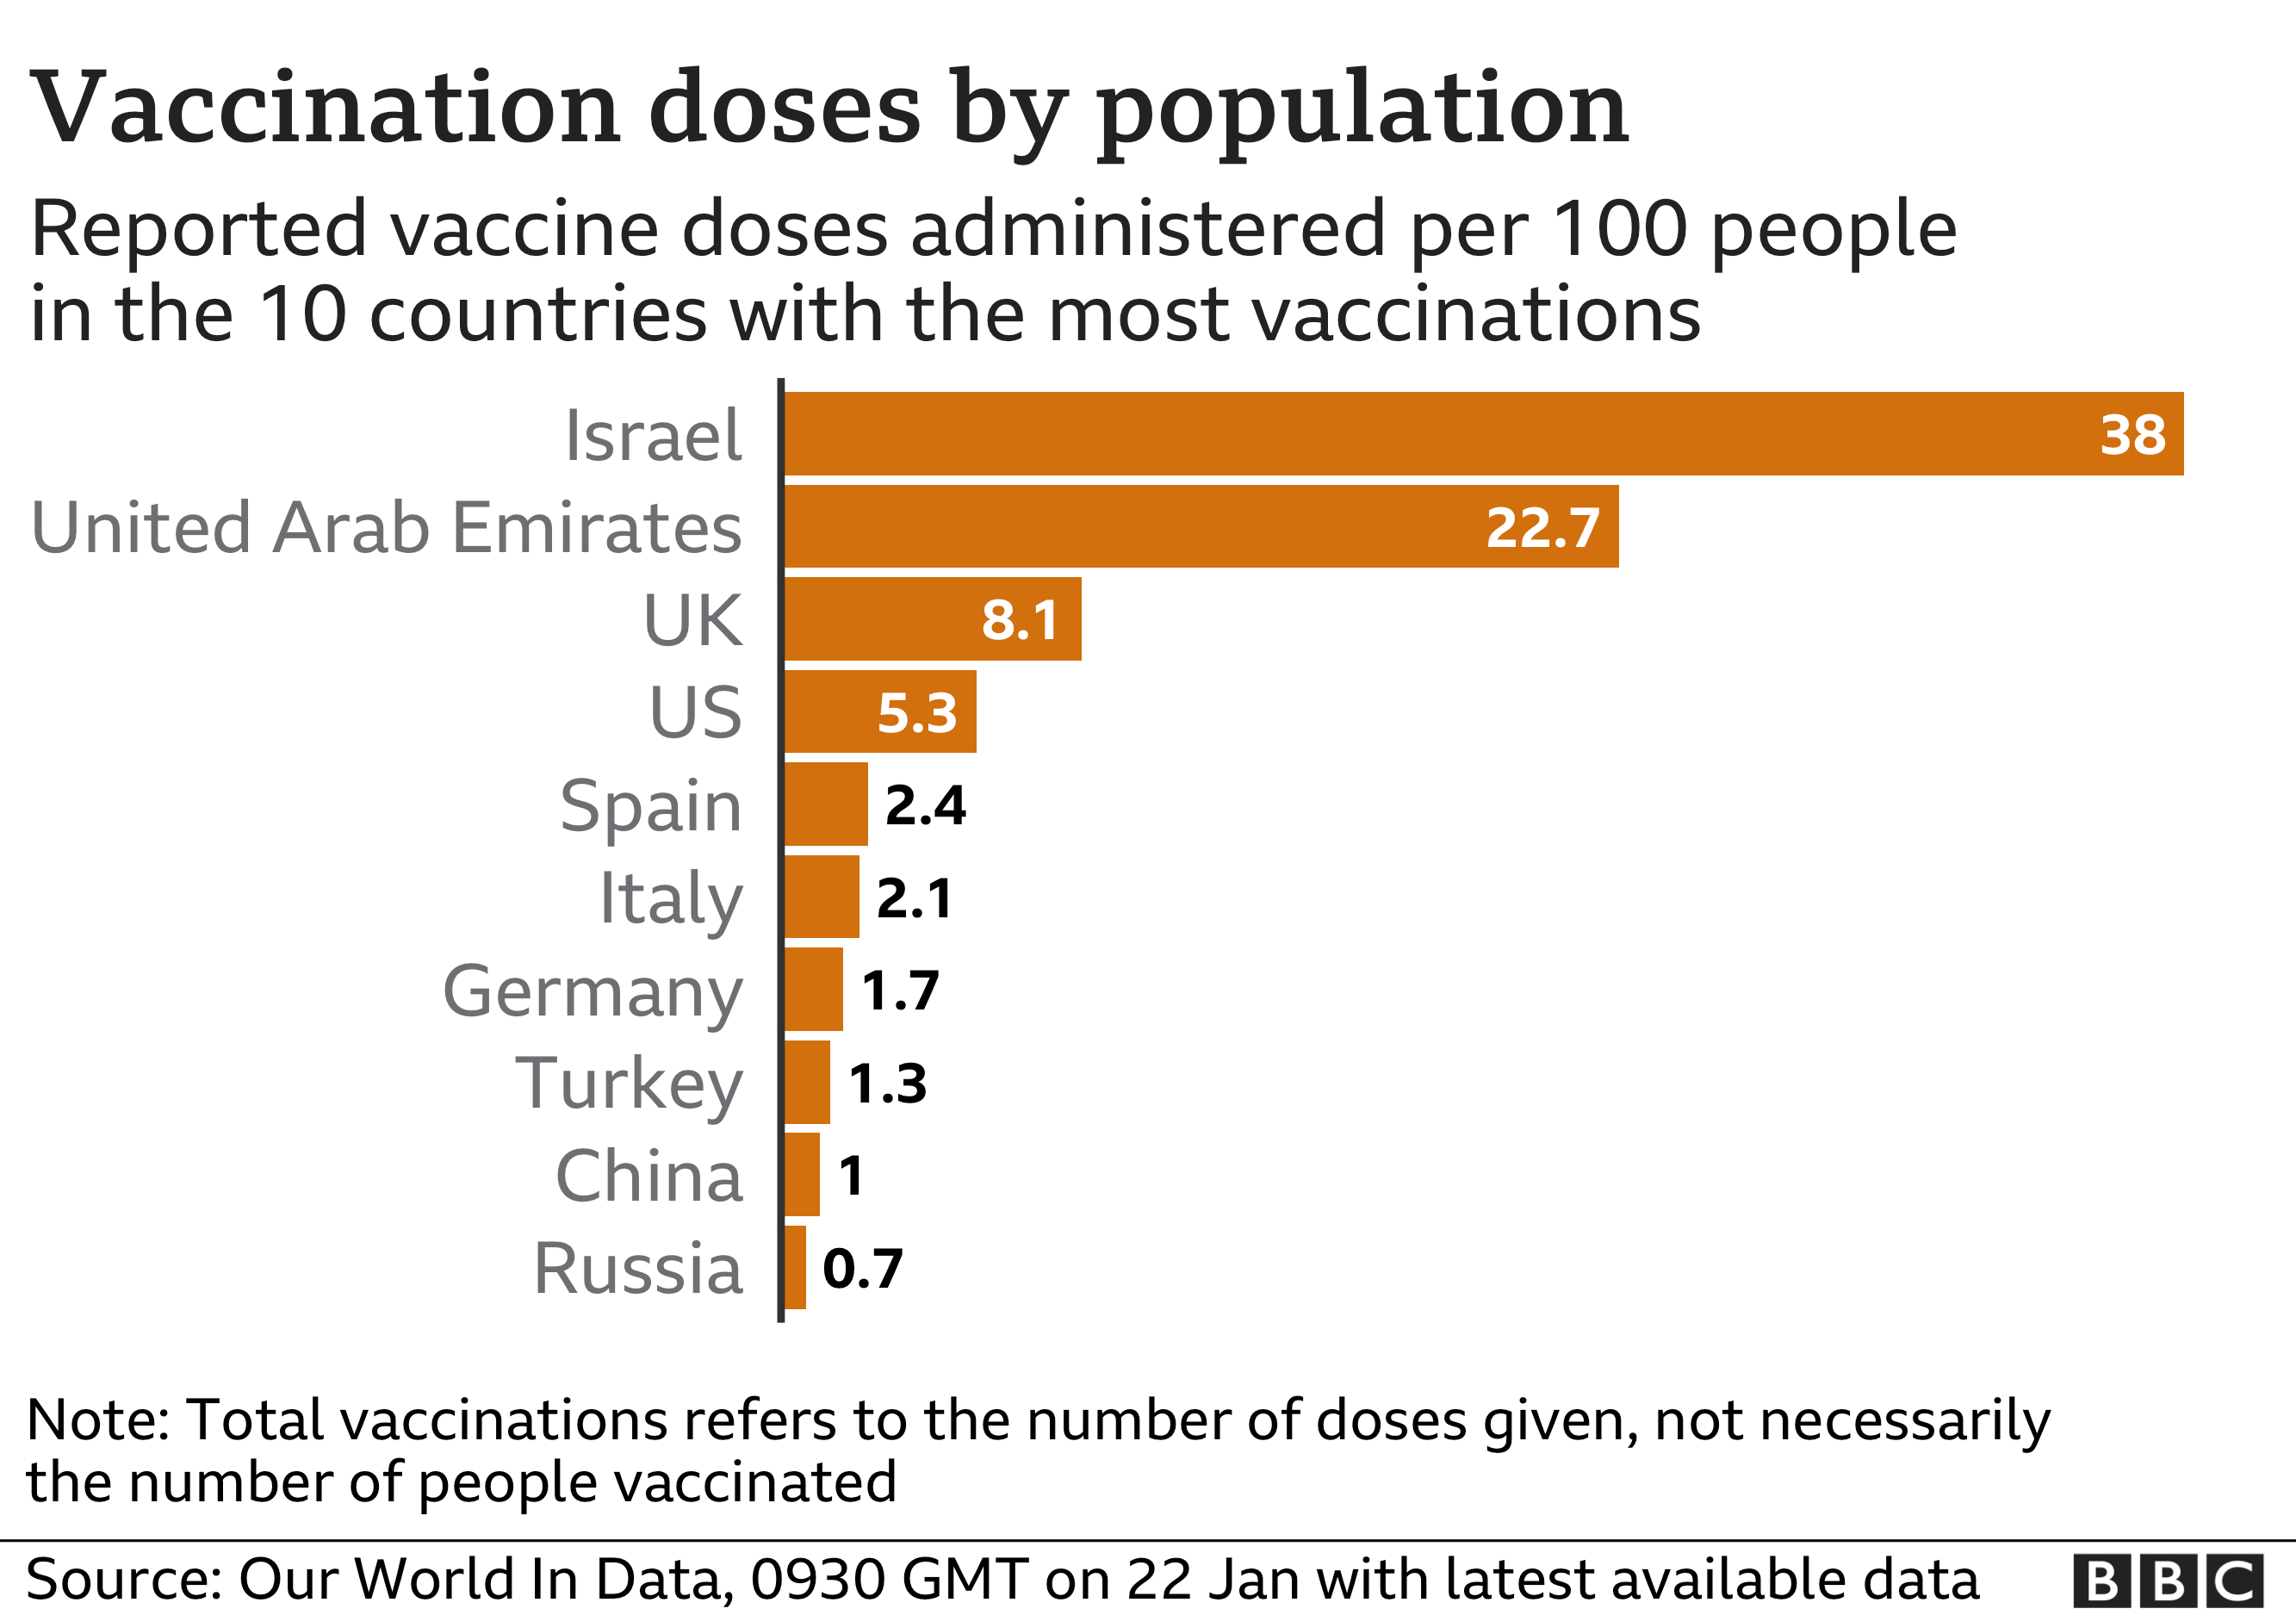 Chart shows doses administered per 100 people in 10 countries with most vaccinations. Updated 22 Jan.